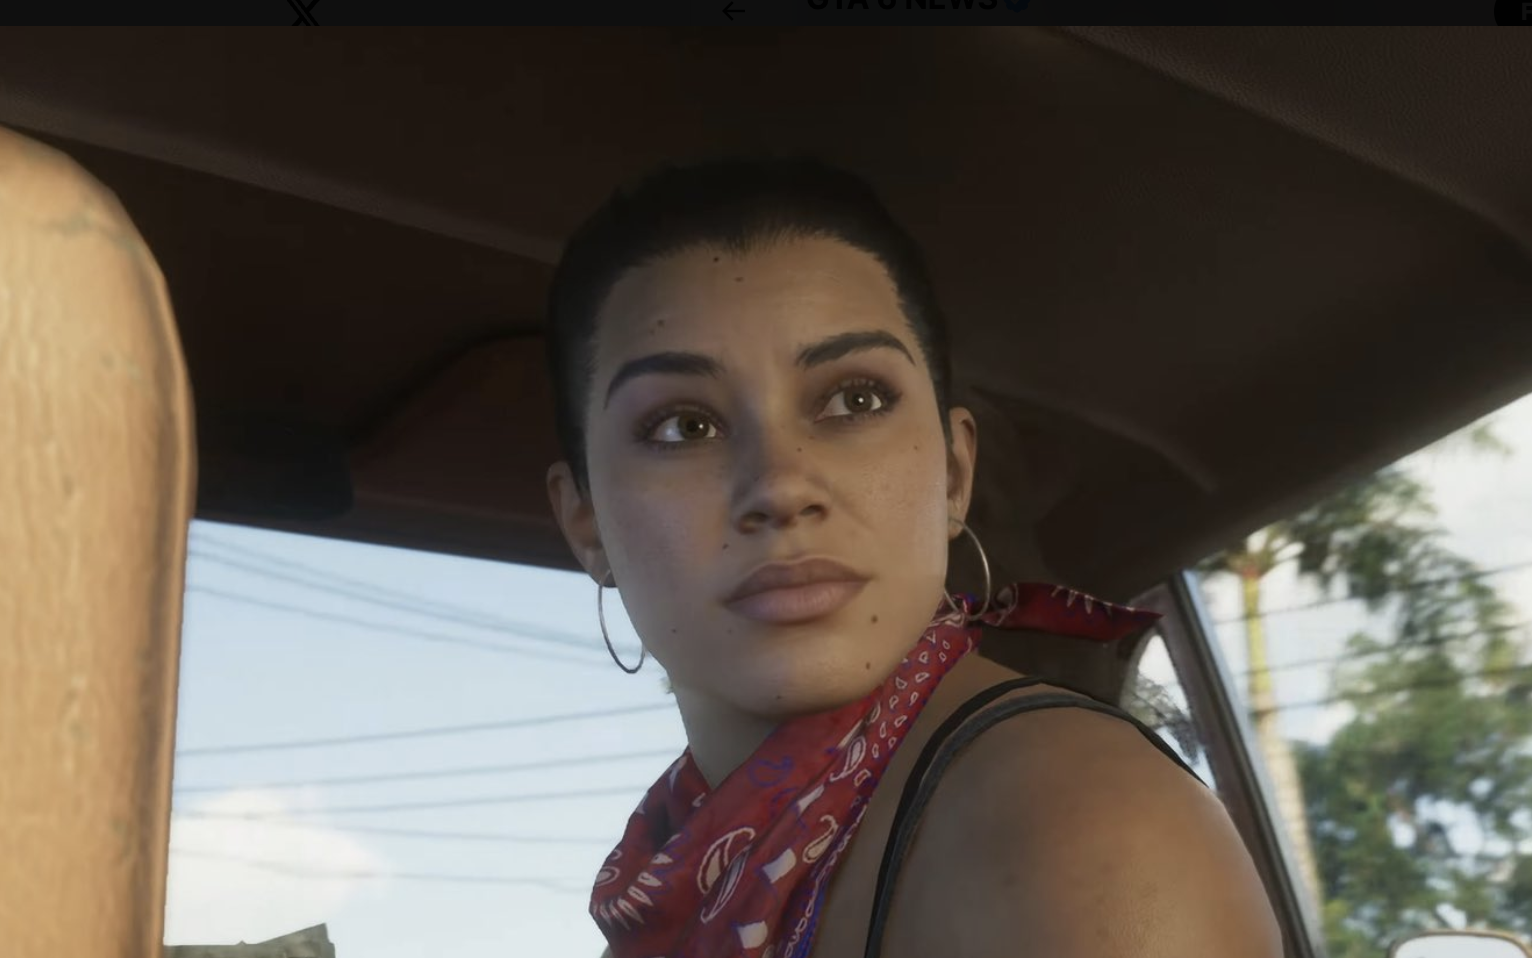 GTA 6: This is Lucia, the first female protagonist of a game in the Grand  Theft Auto series - Meristation